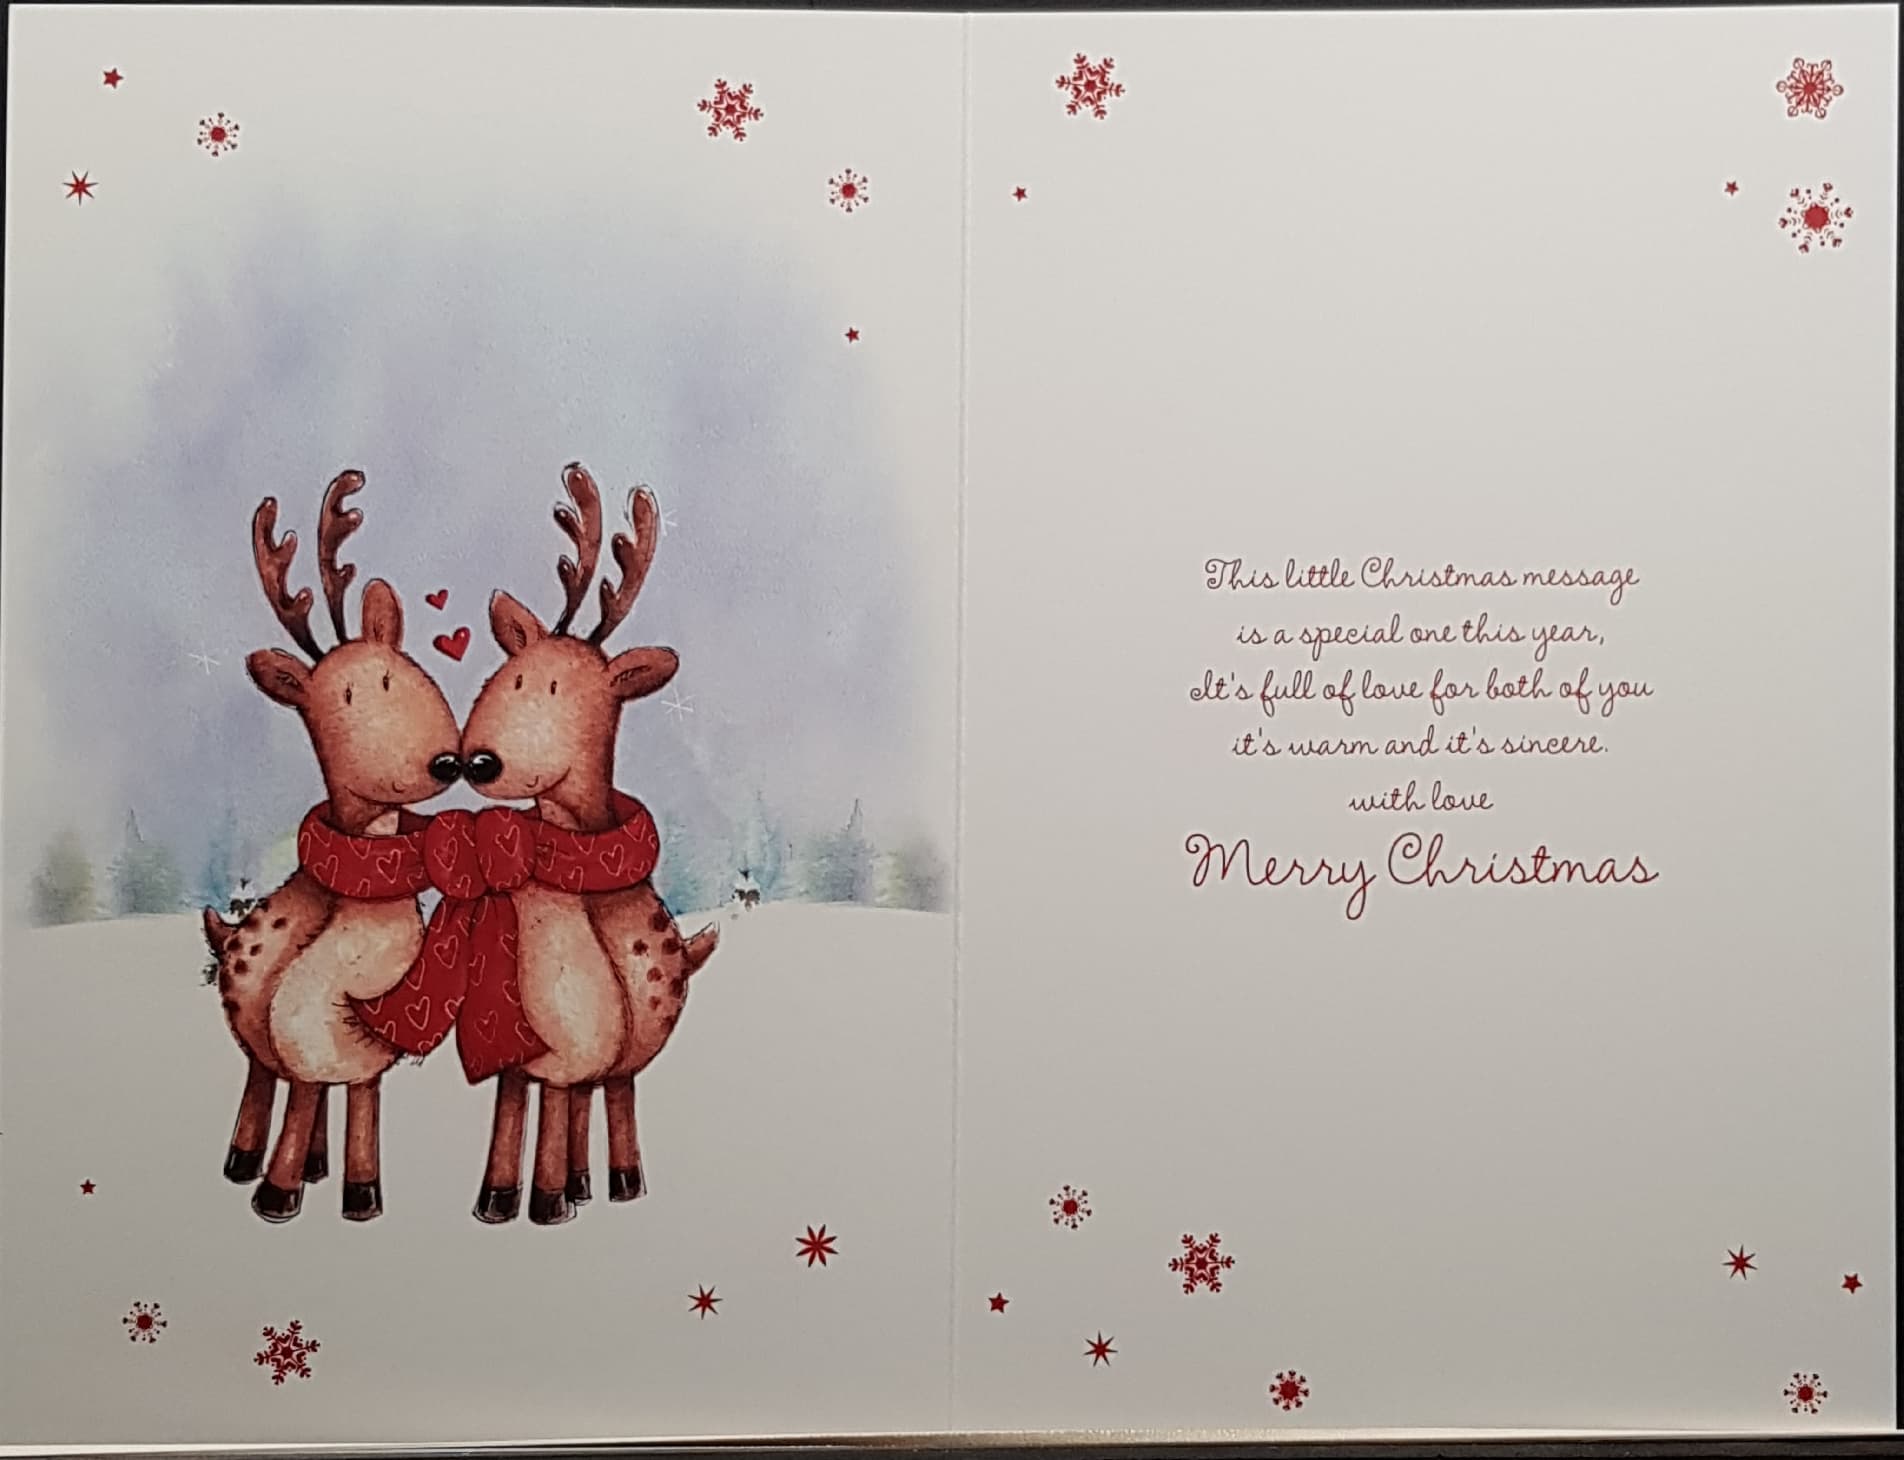 Auntie & Uncle Christmas Card - Merry Christmas & Two Reindeer in Red Scarves